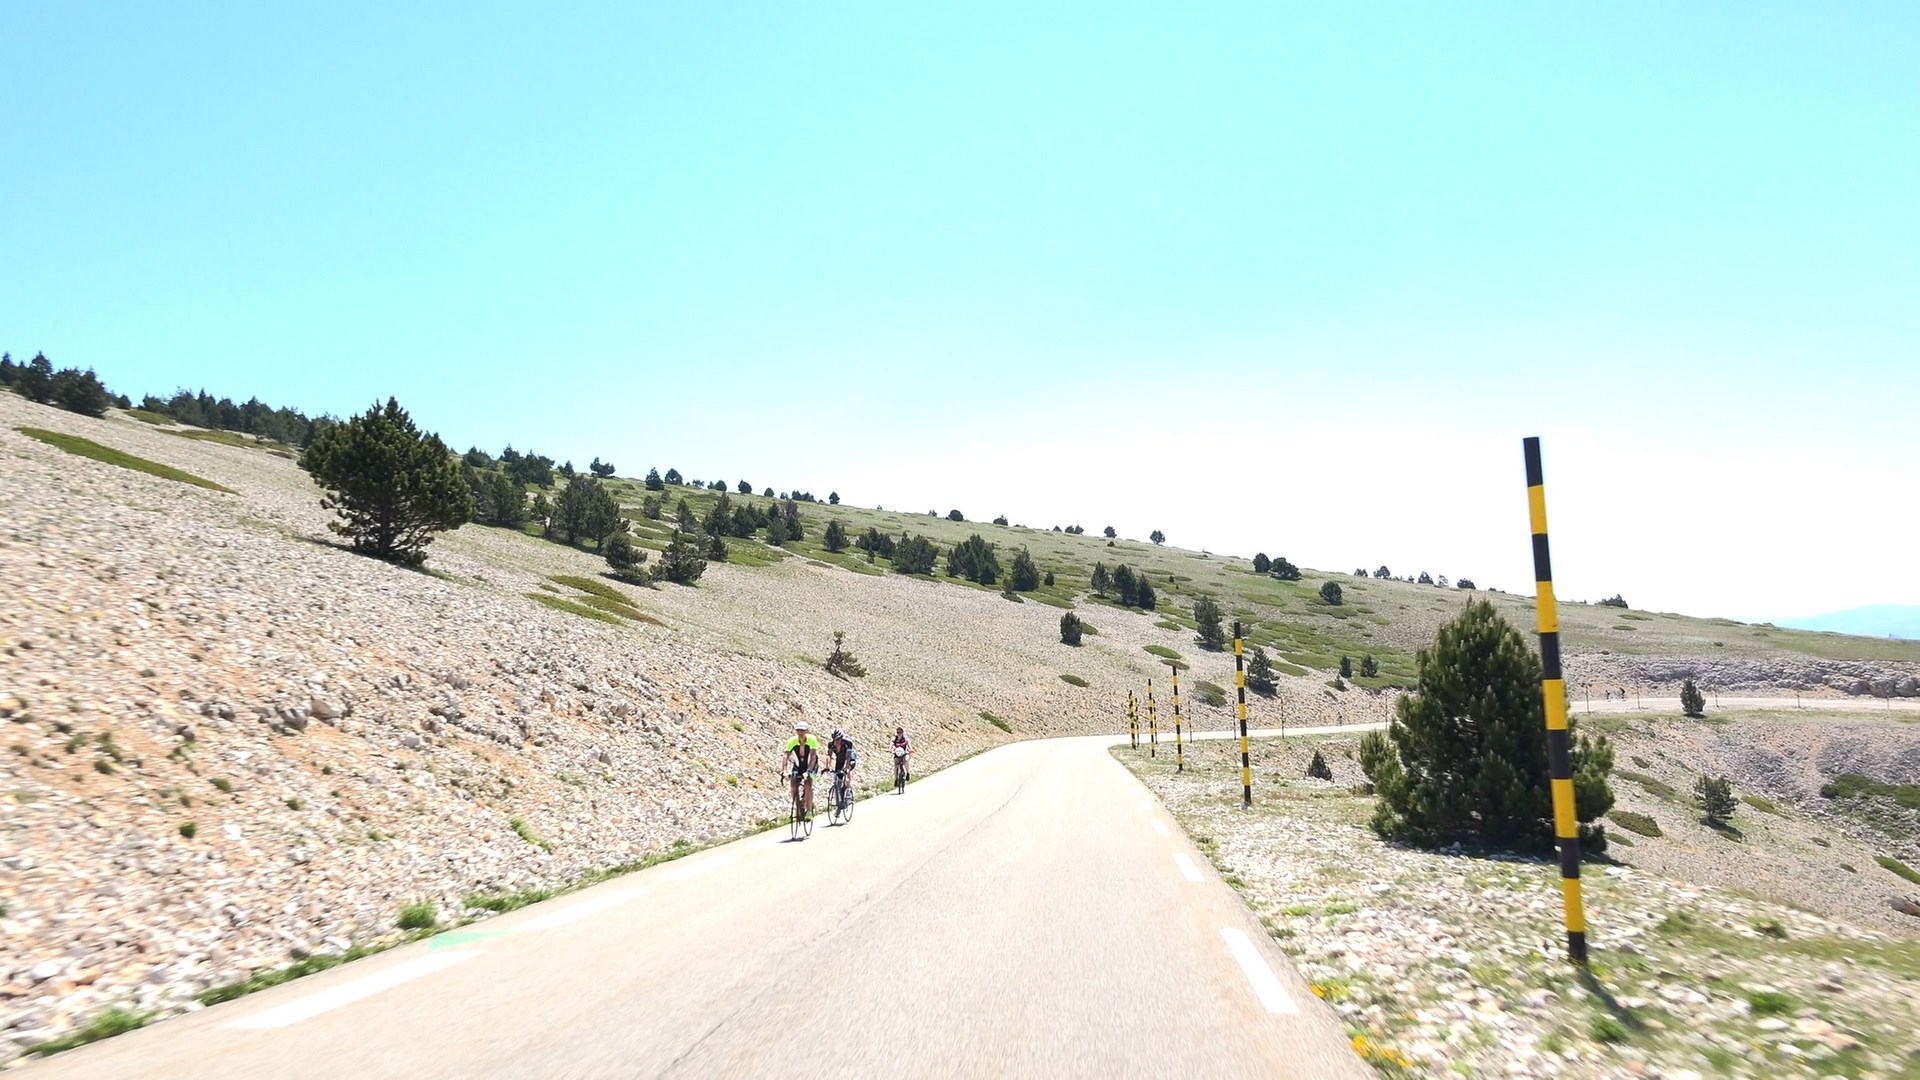 Grand Ventoux cloclwise Gallery Image 5